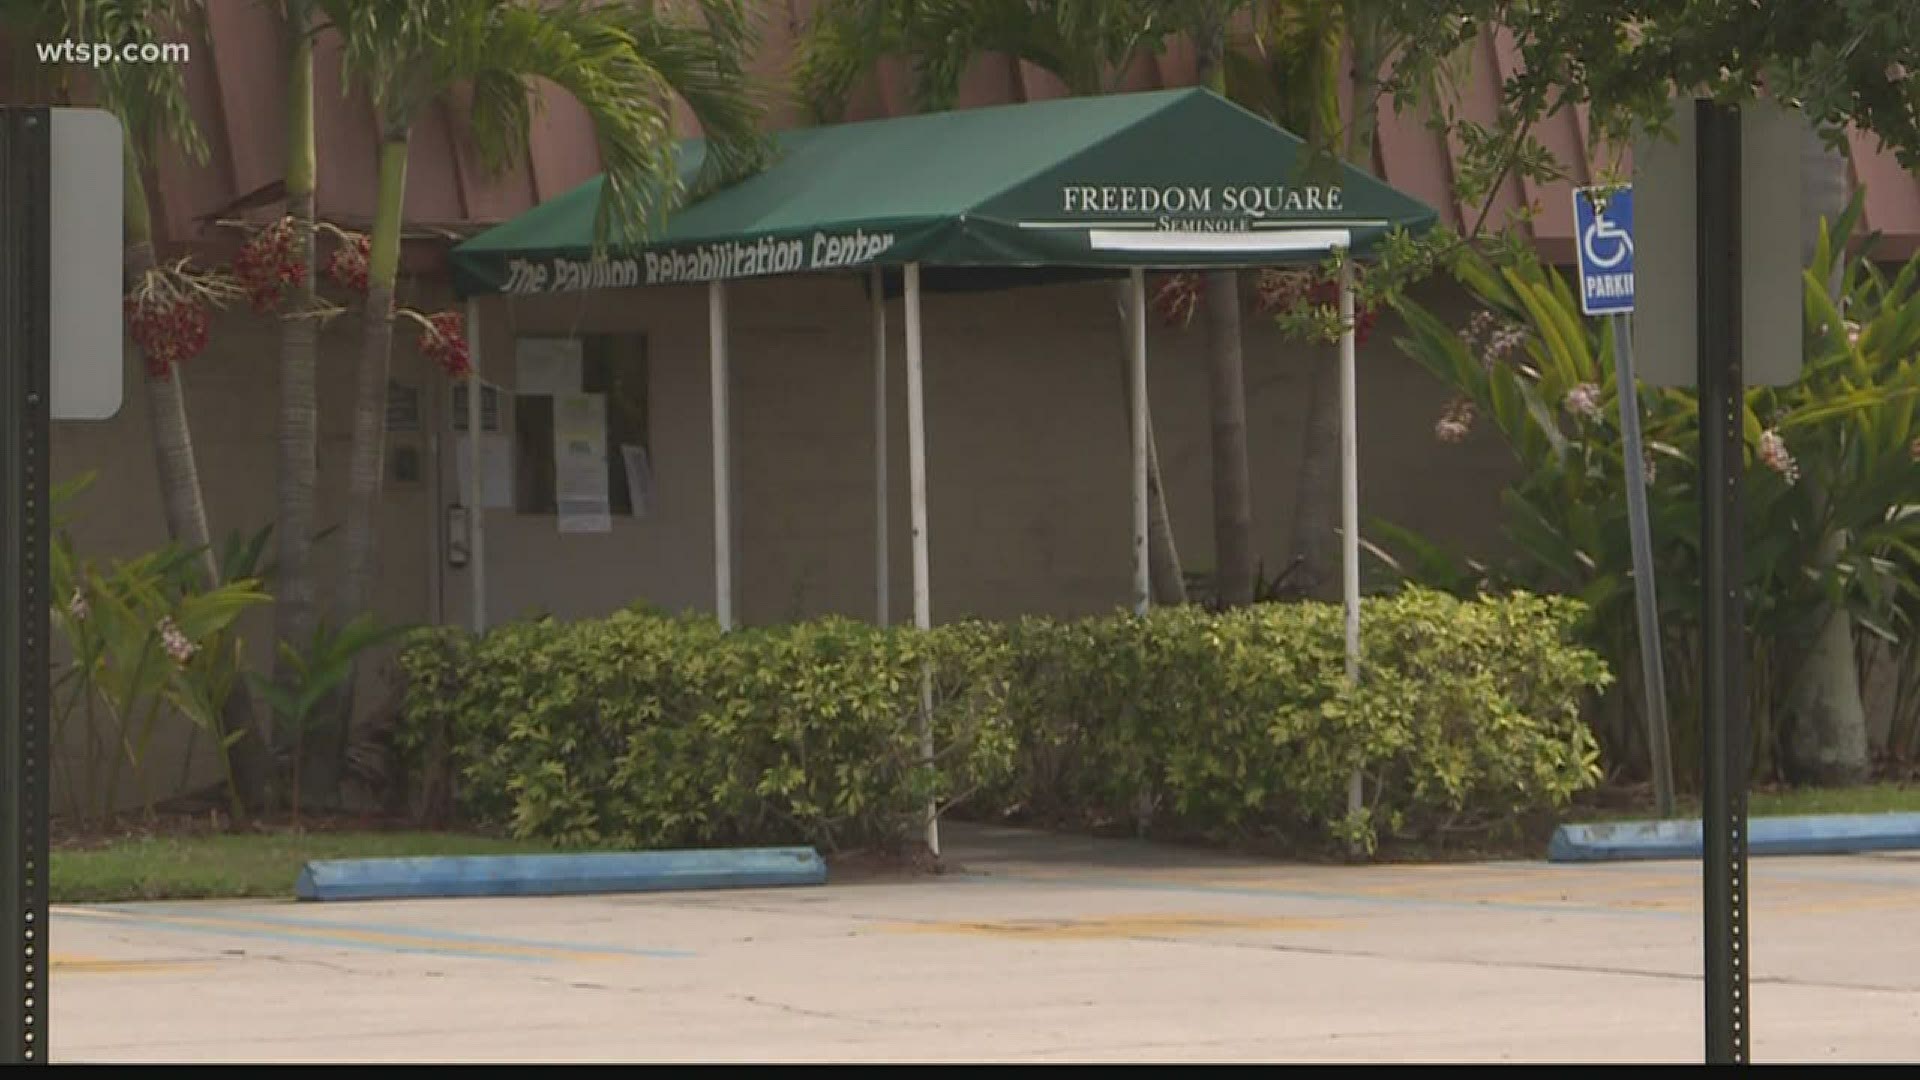 Amid increasing pressure to do so, the state of Florida named nursing homes and assisted living facilities experiencing outbreaks of COVID-19 coronavirus.